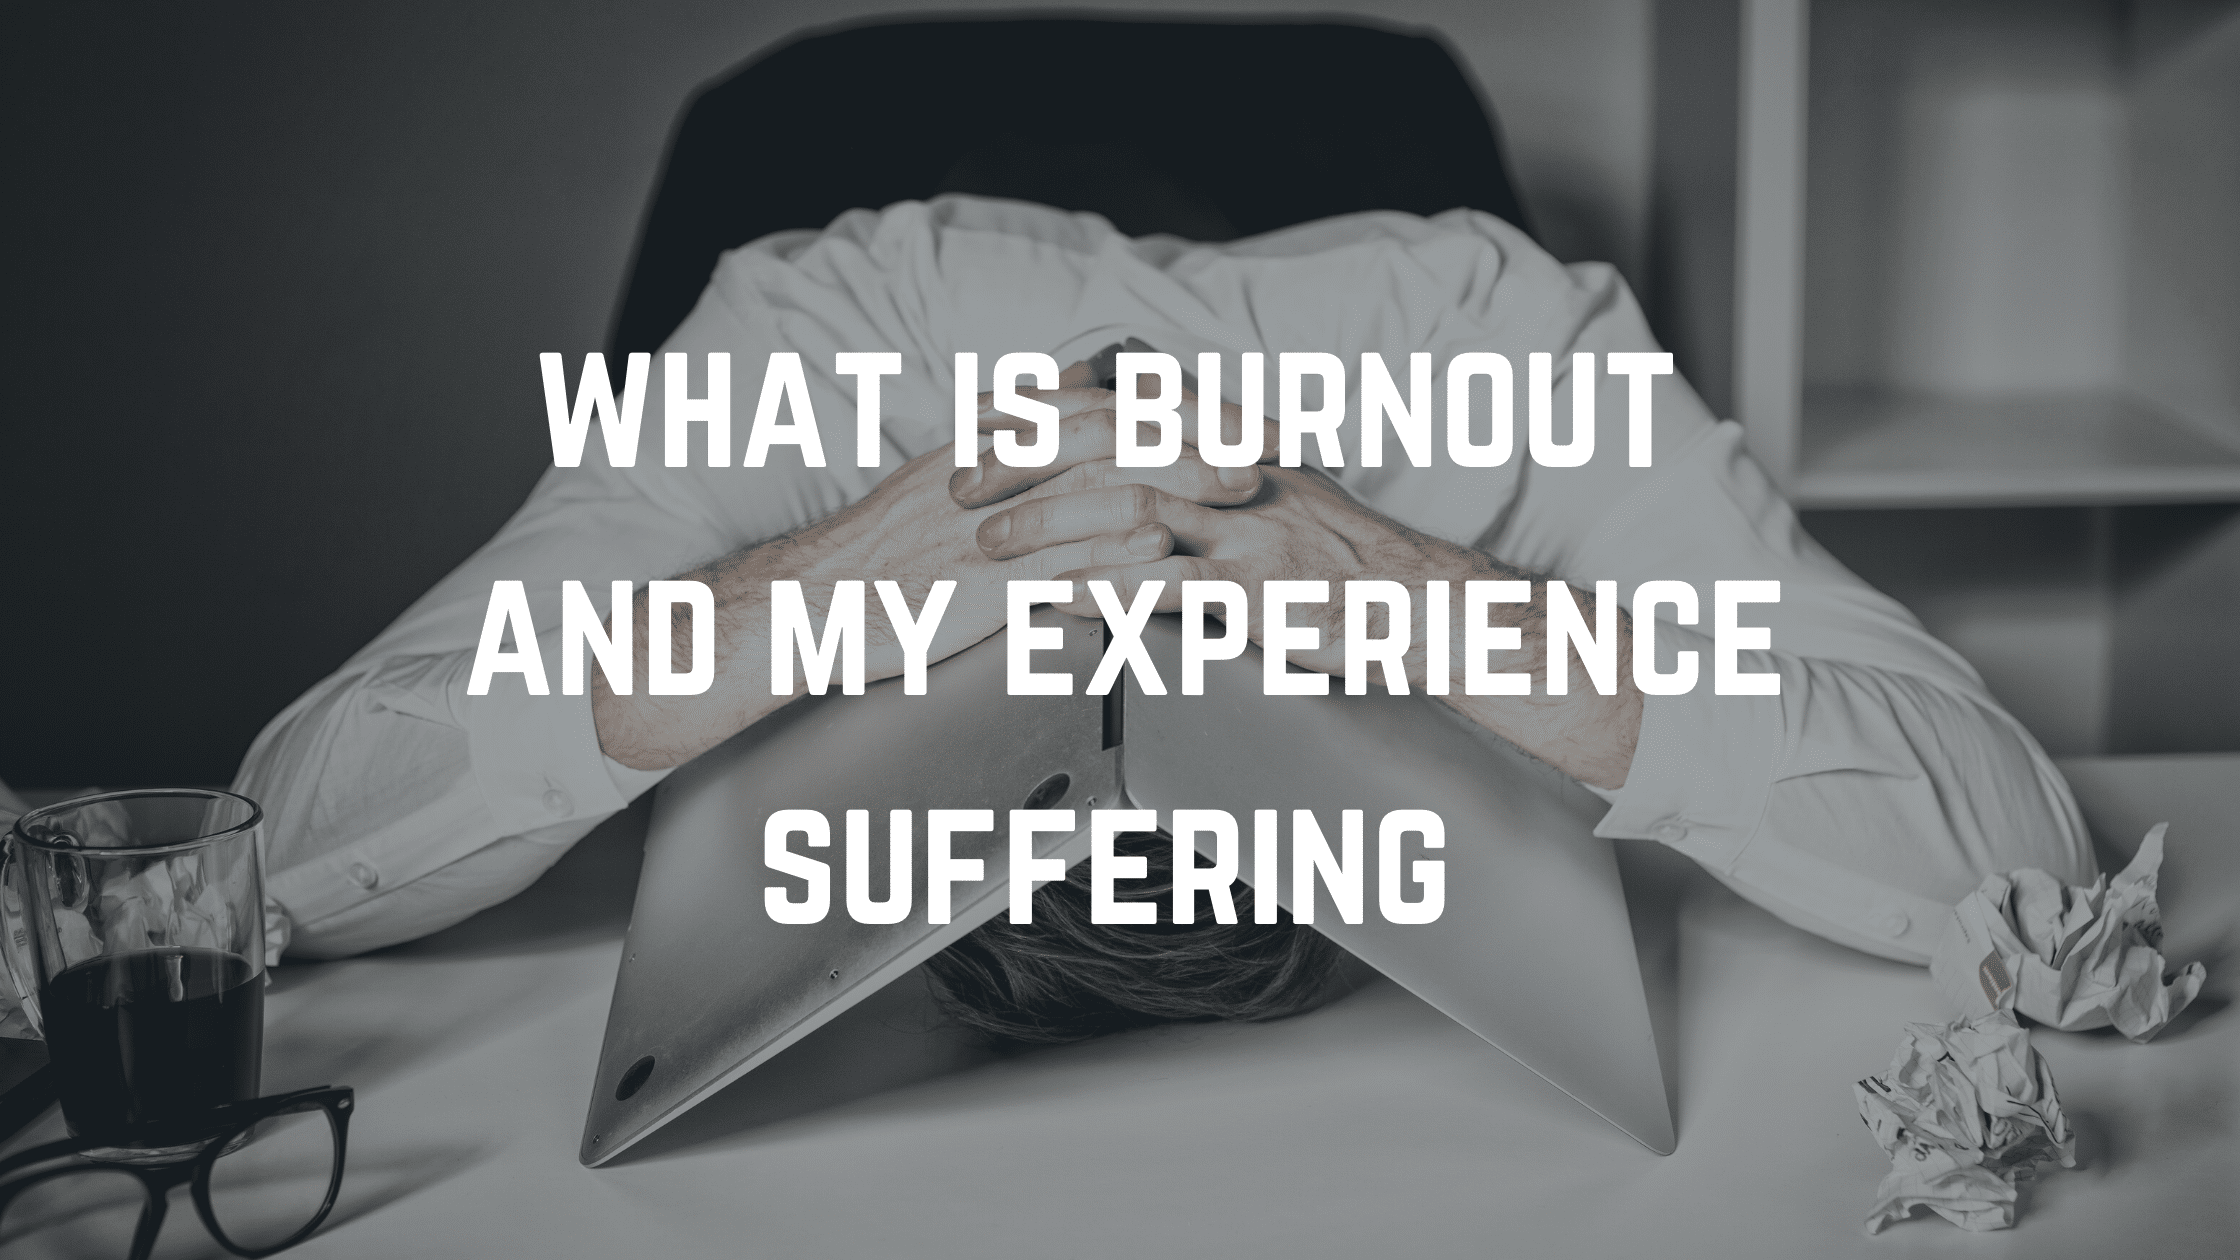 My experience suffering with burn out